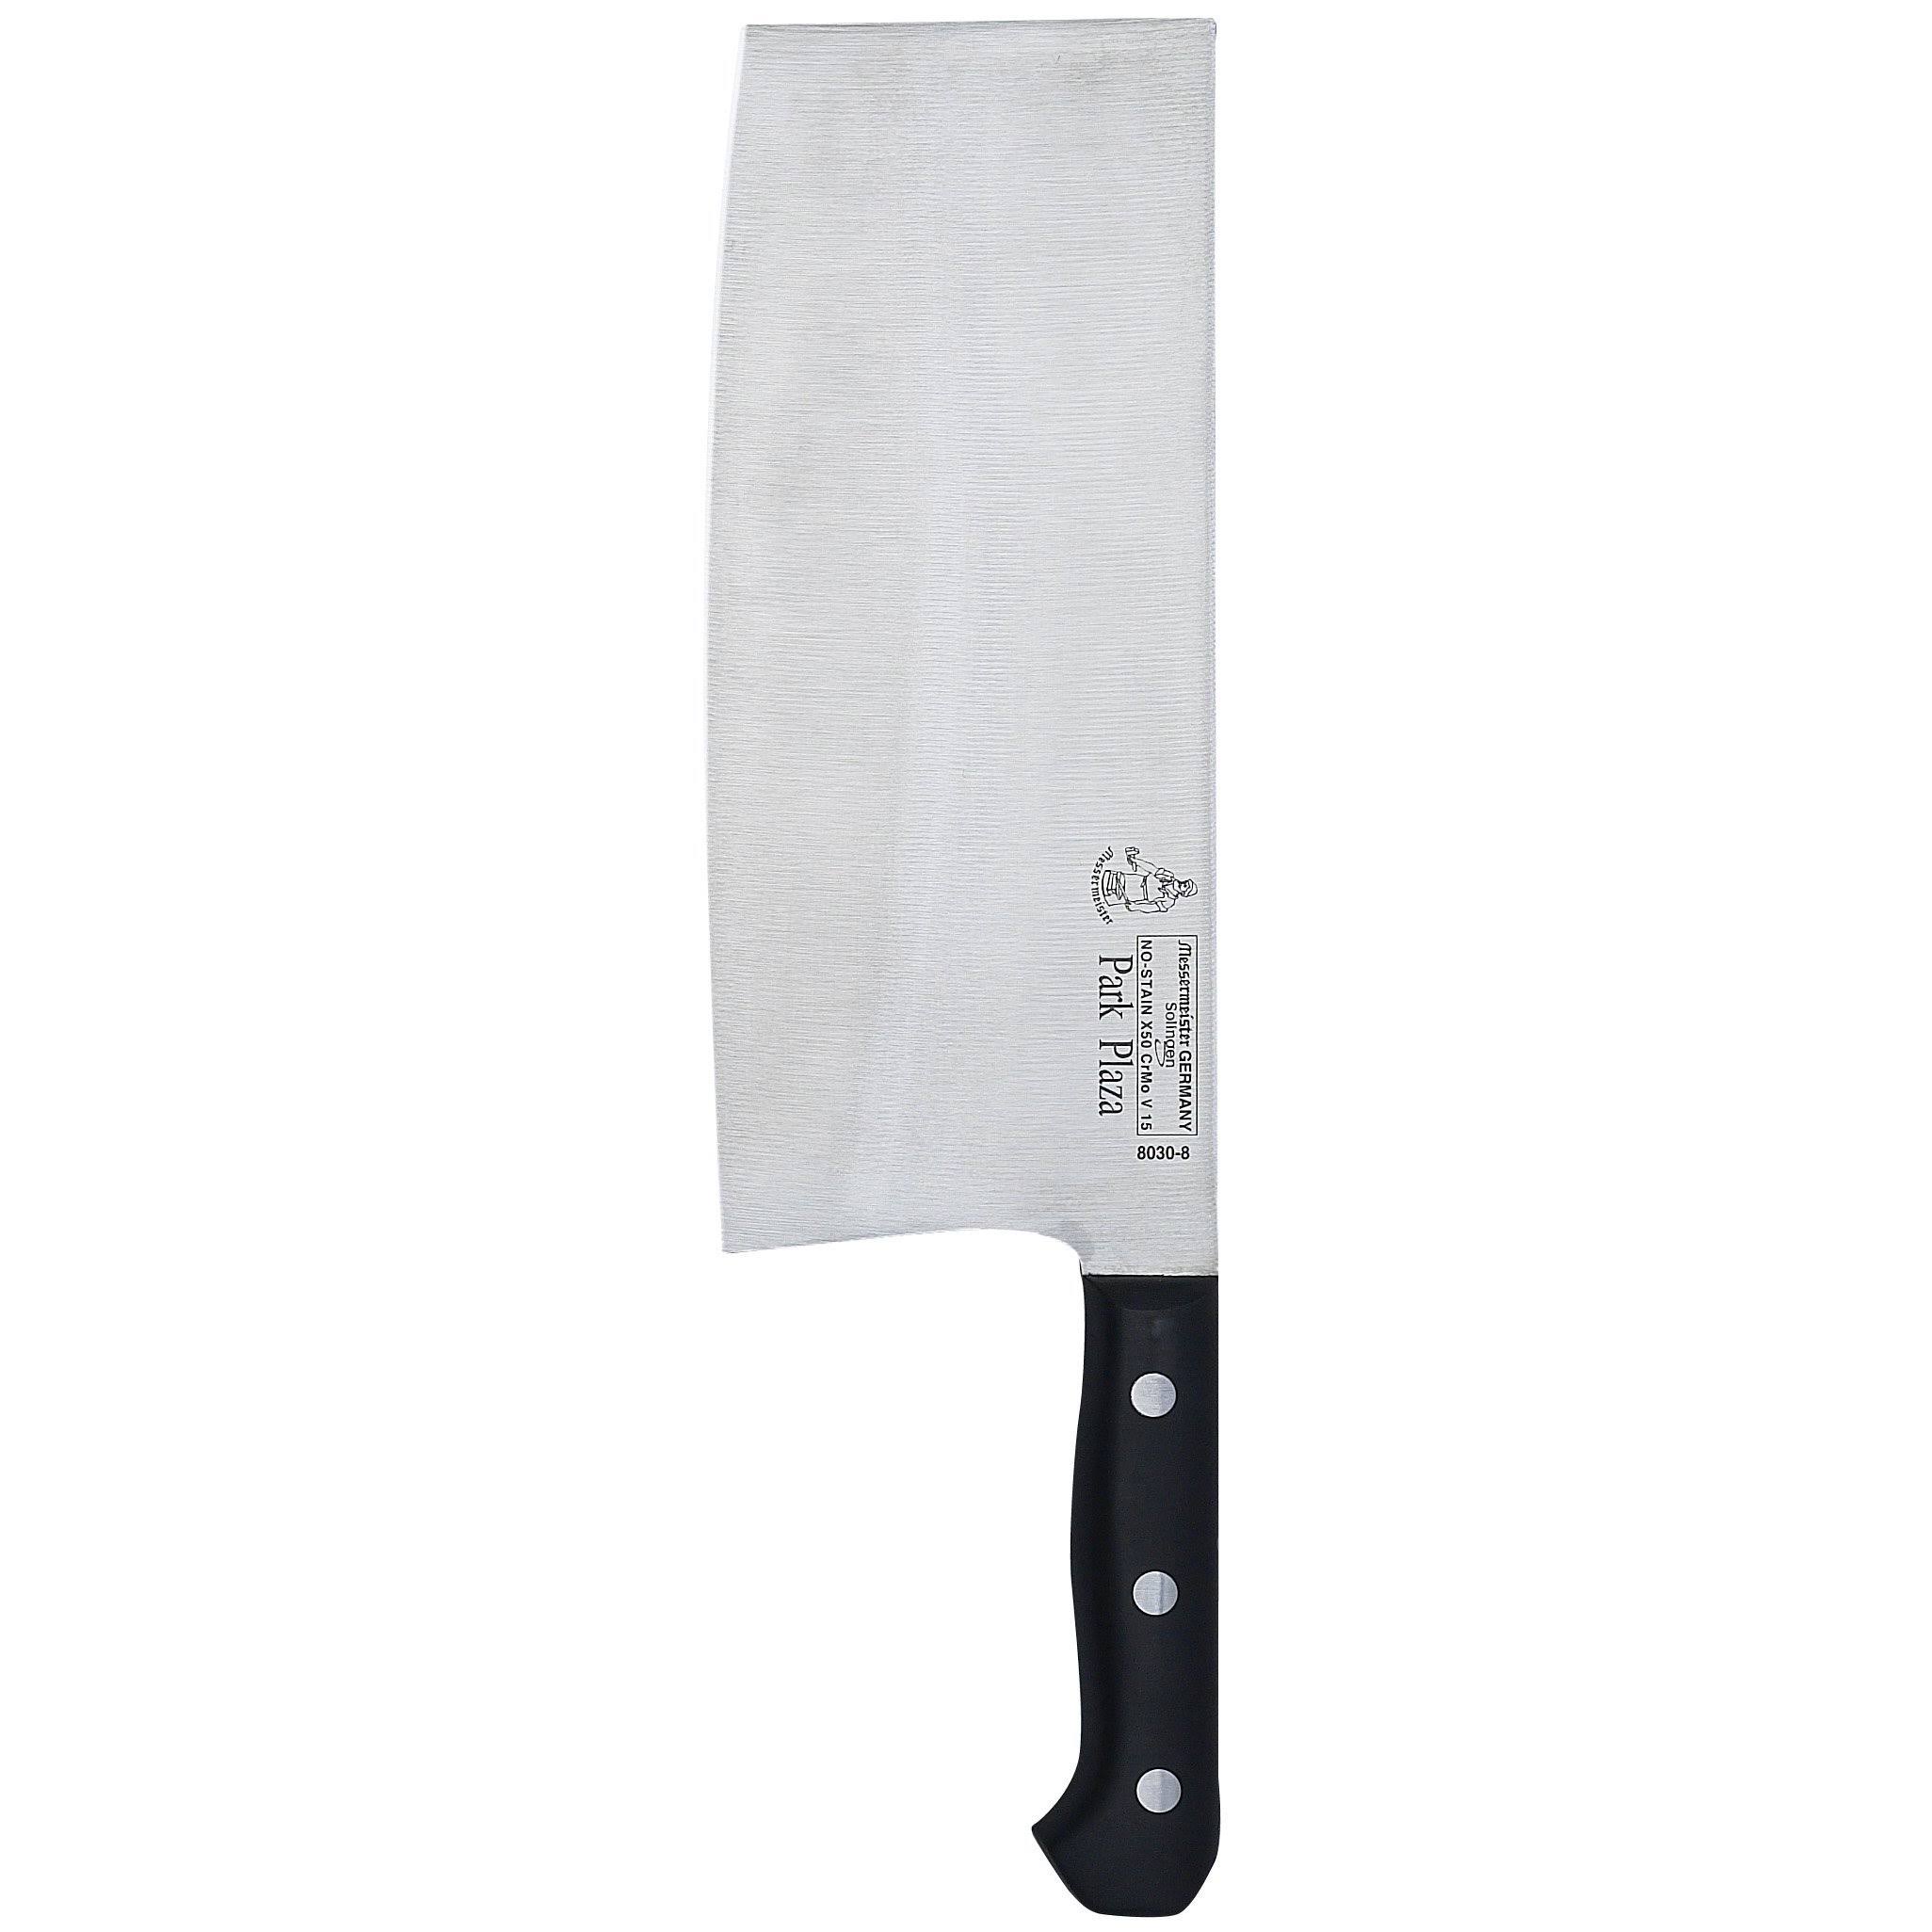 Messermeister Park Plaza 8-Inch Chinese Knife